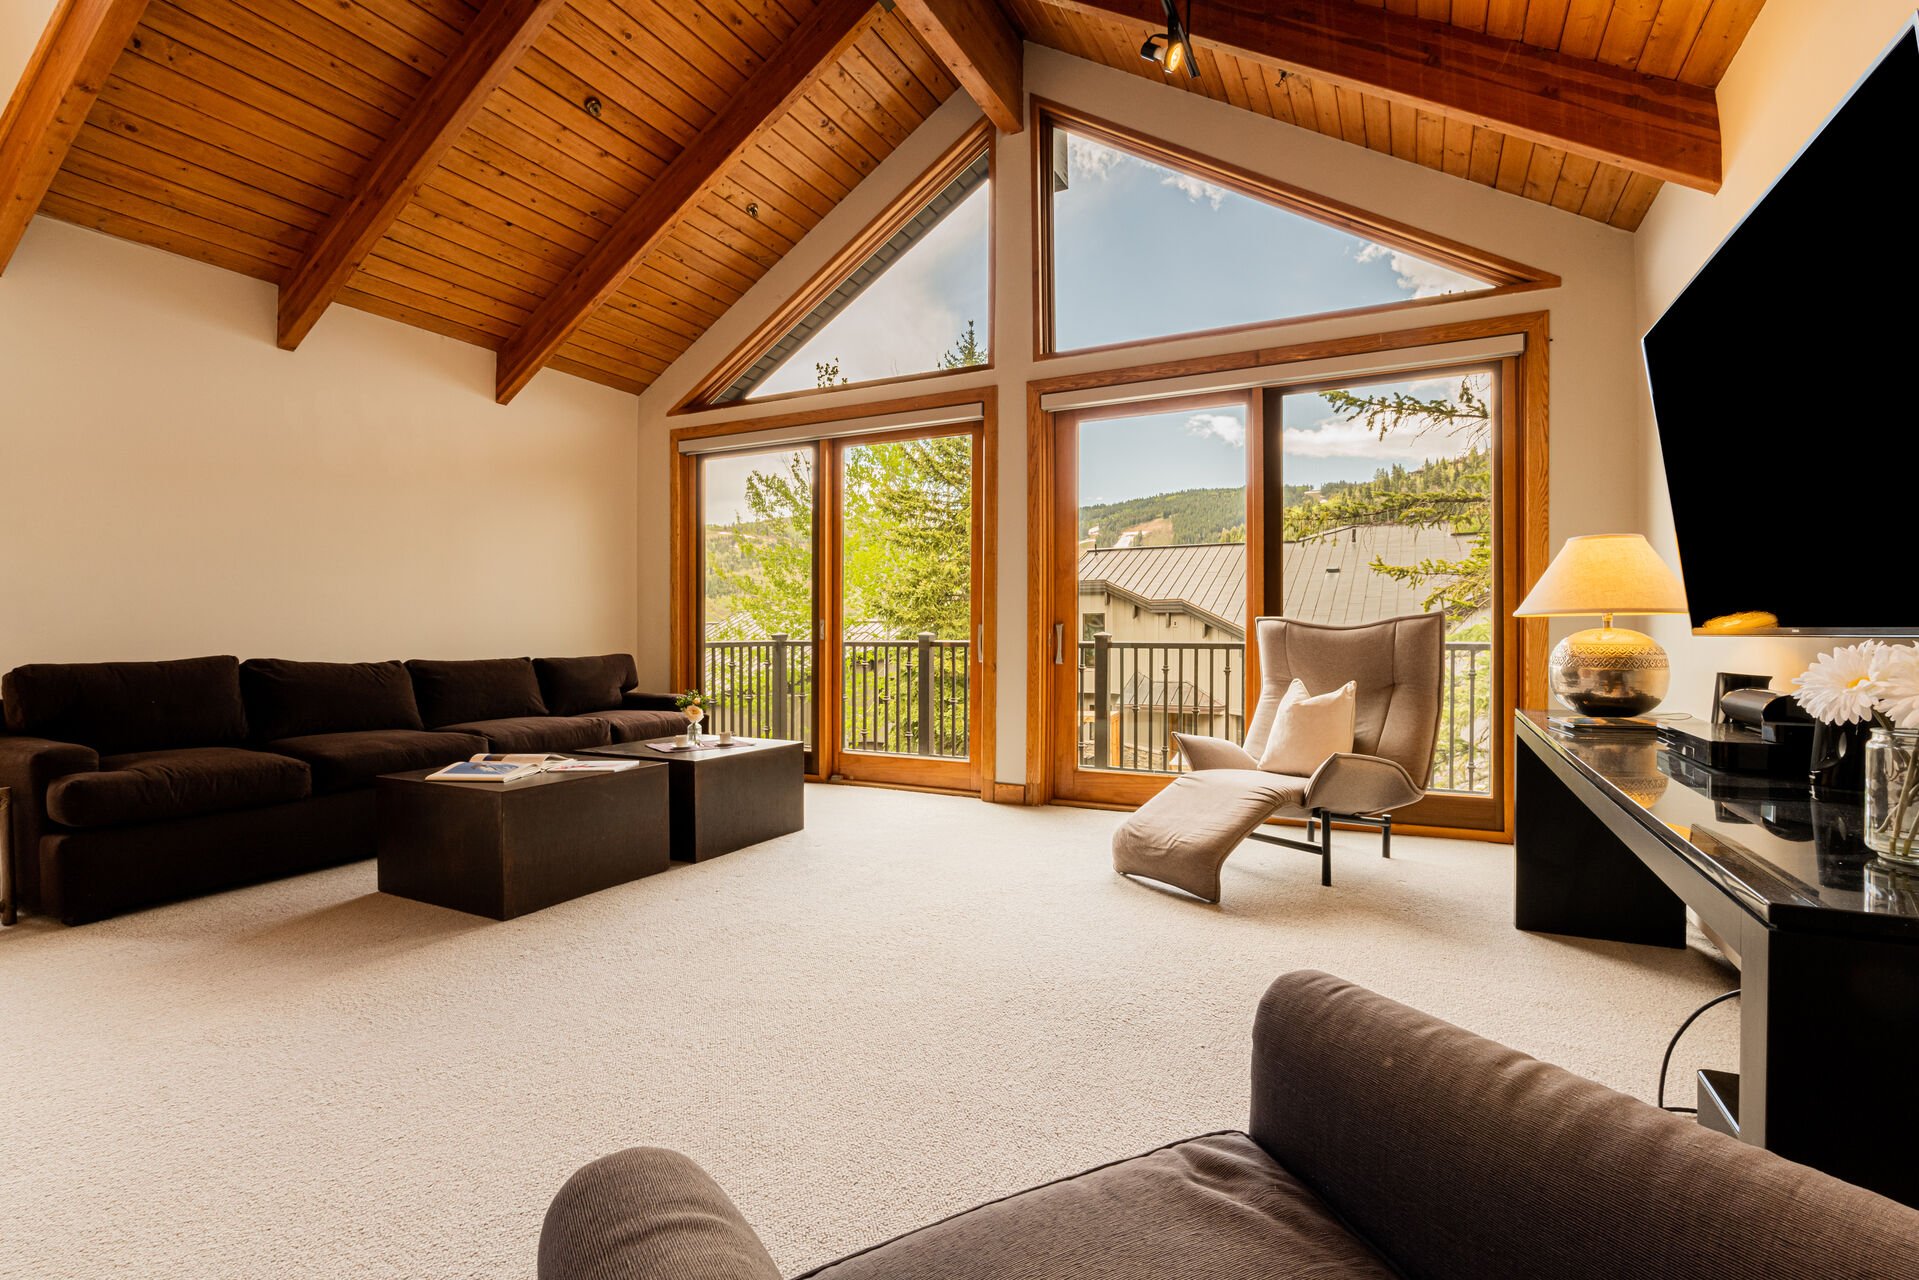 Open and Bright with Mountain Views